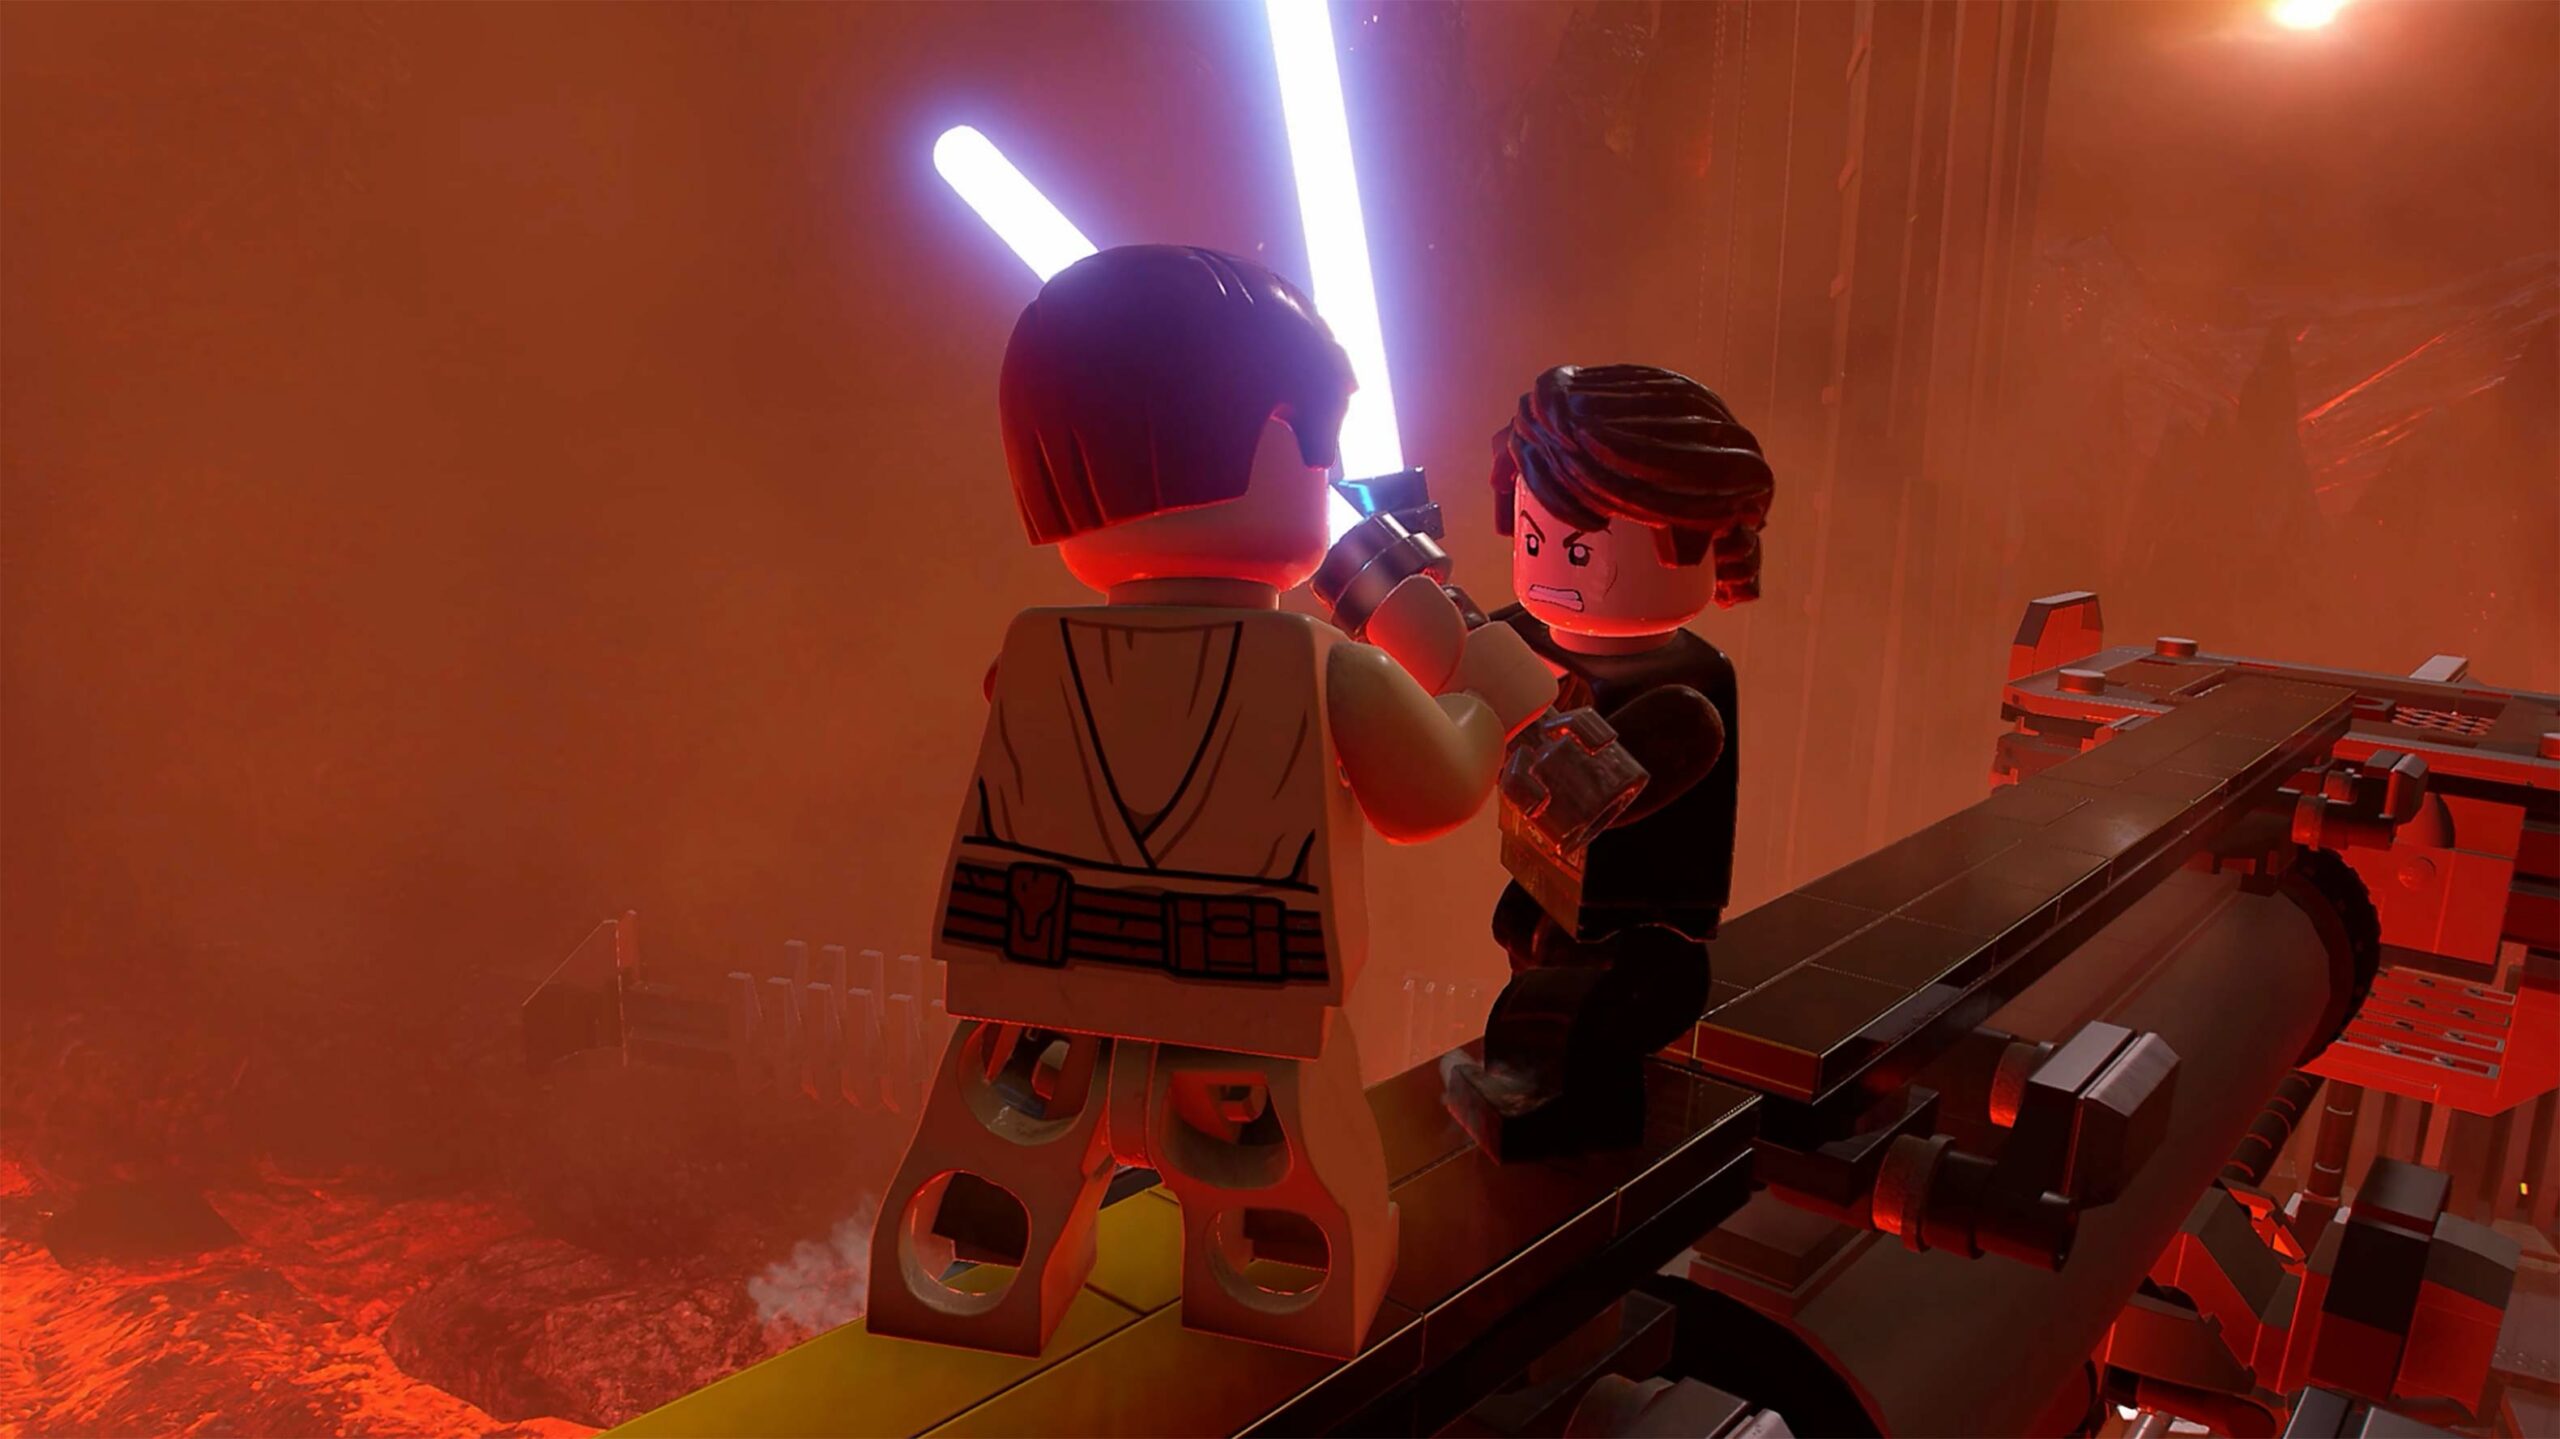 Lego Star Wars: The Skywalker Saga -- Obi-Wan and Anakin engage in their iconic lightsaber duel from Revenge of the Sith